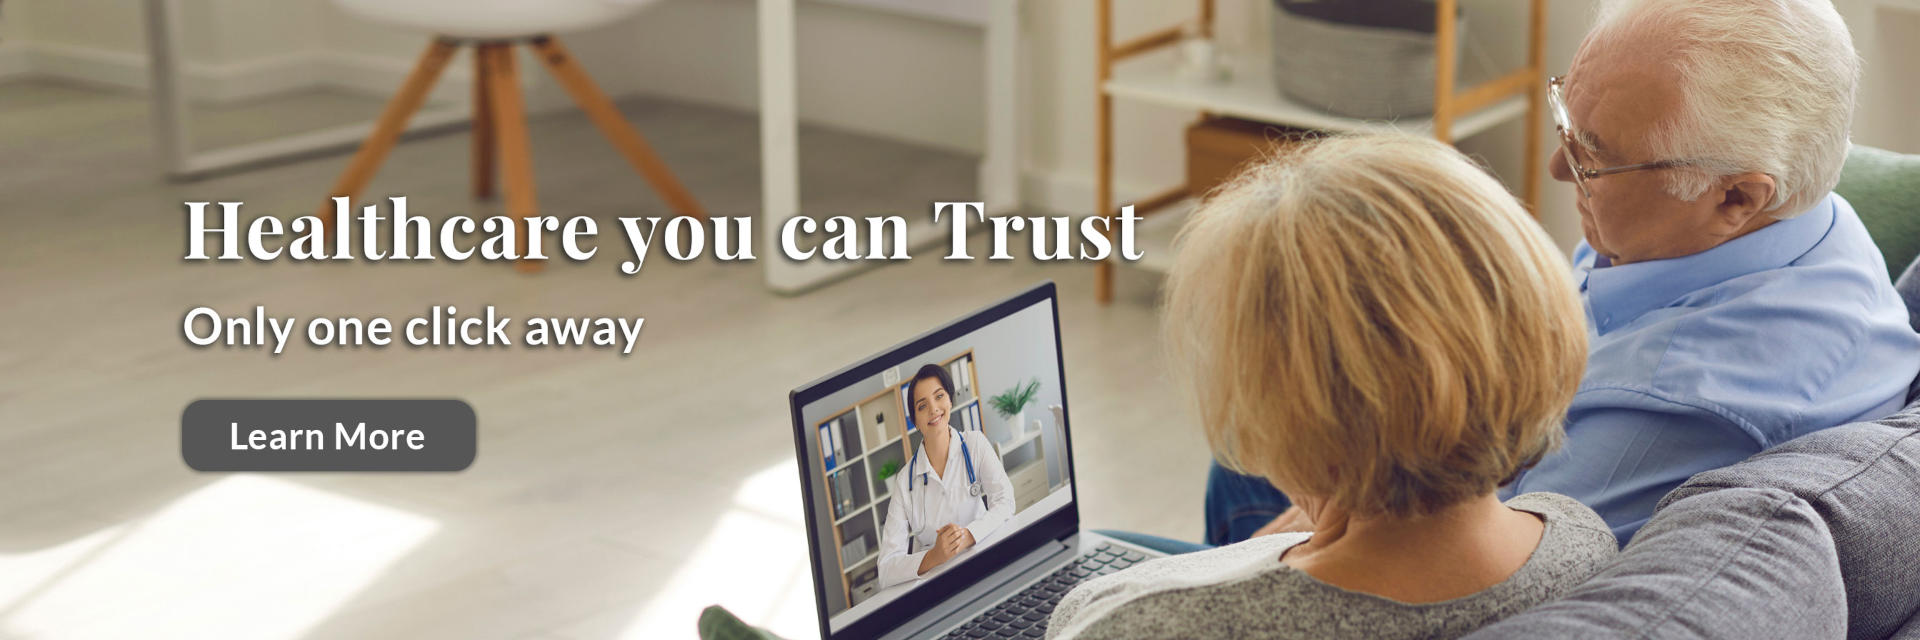 Healthcare you can Trust. Only one click away